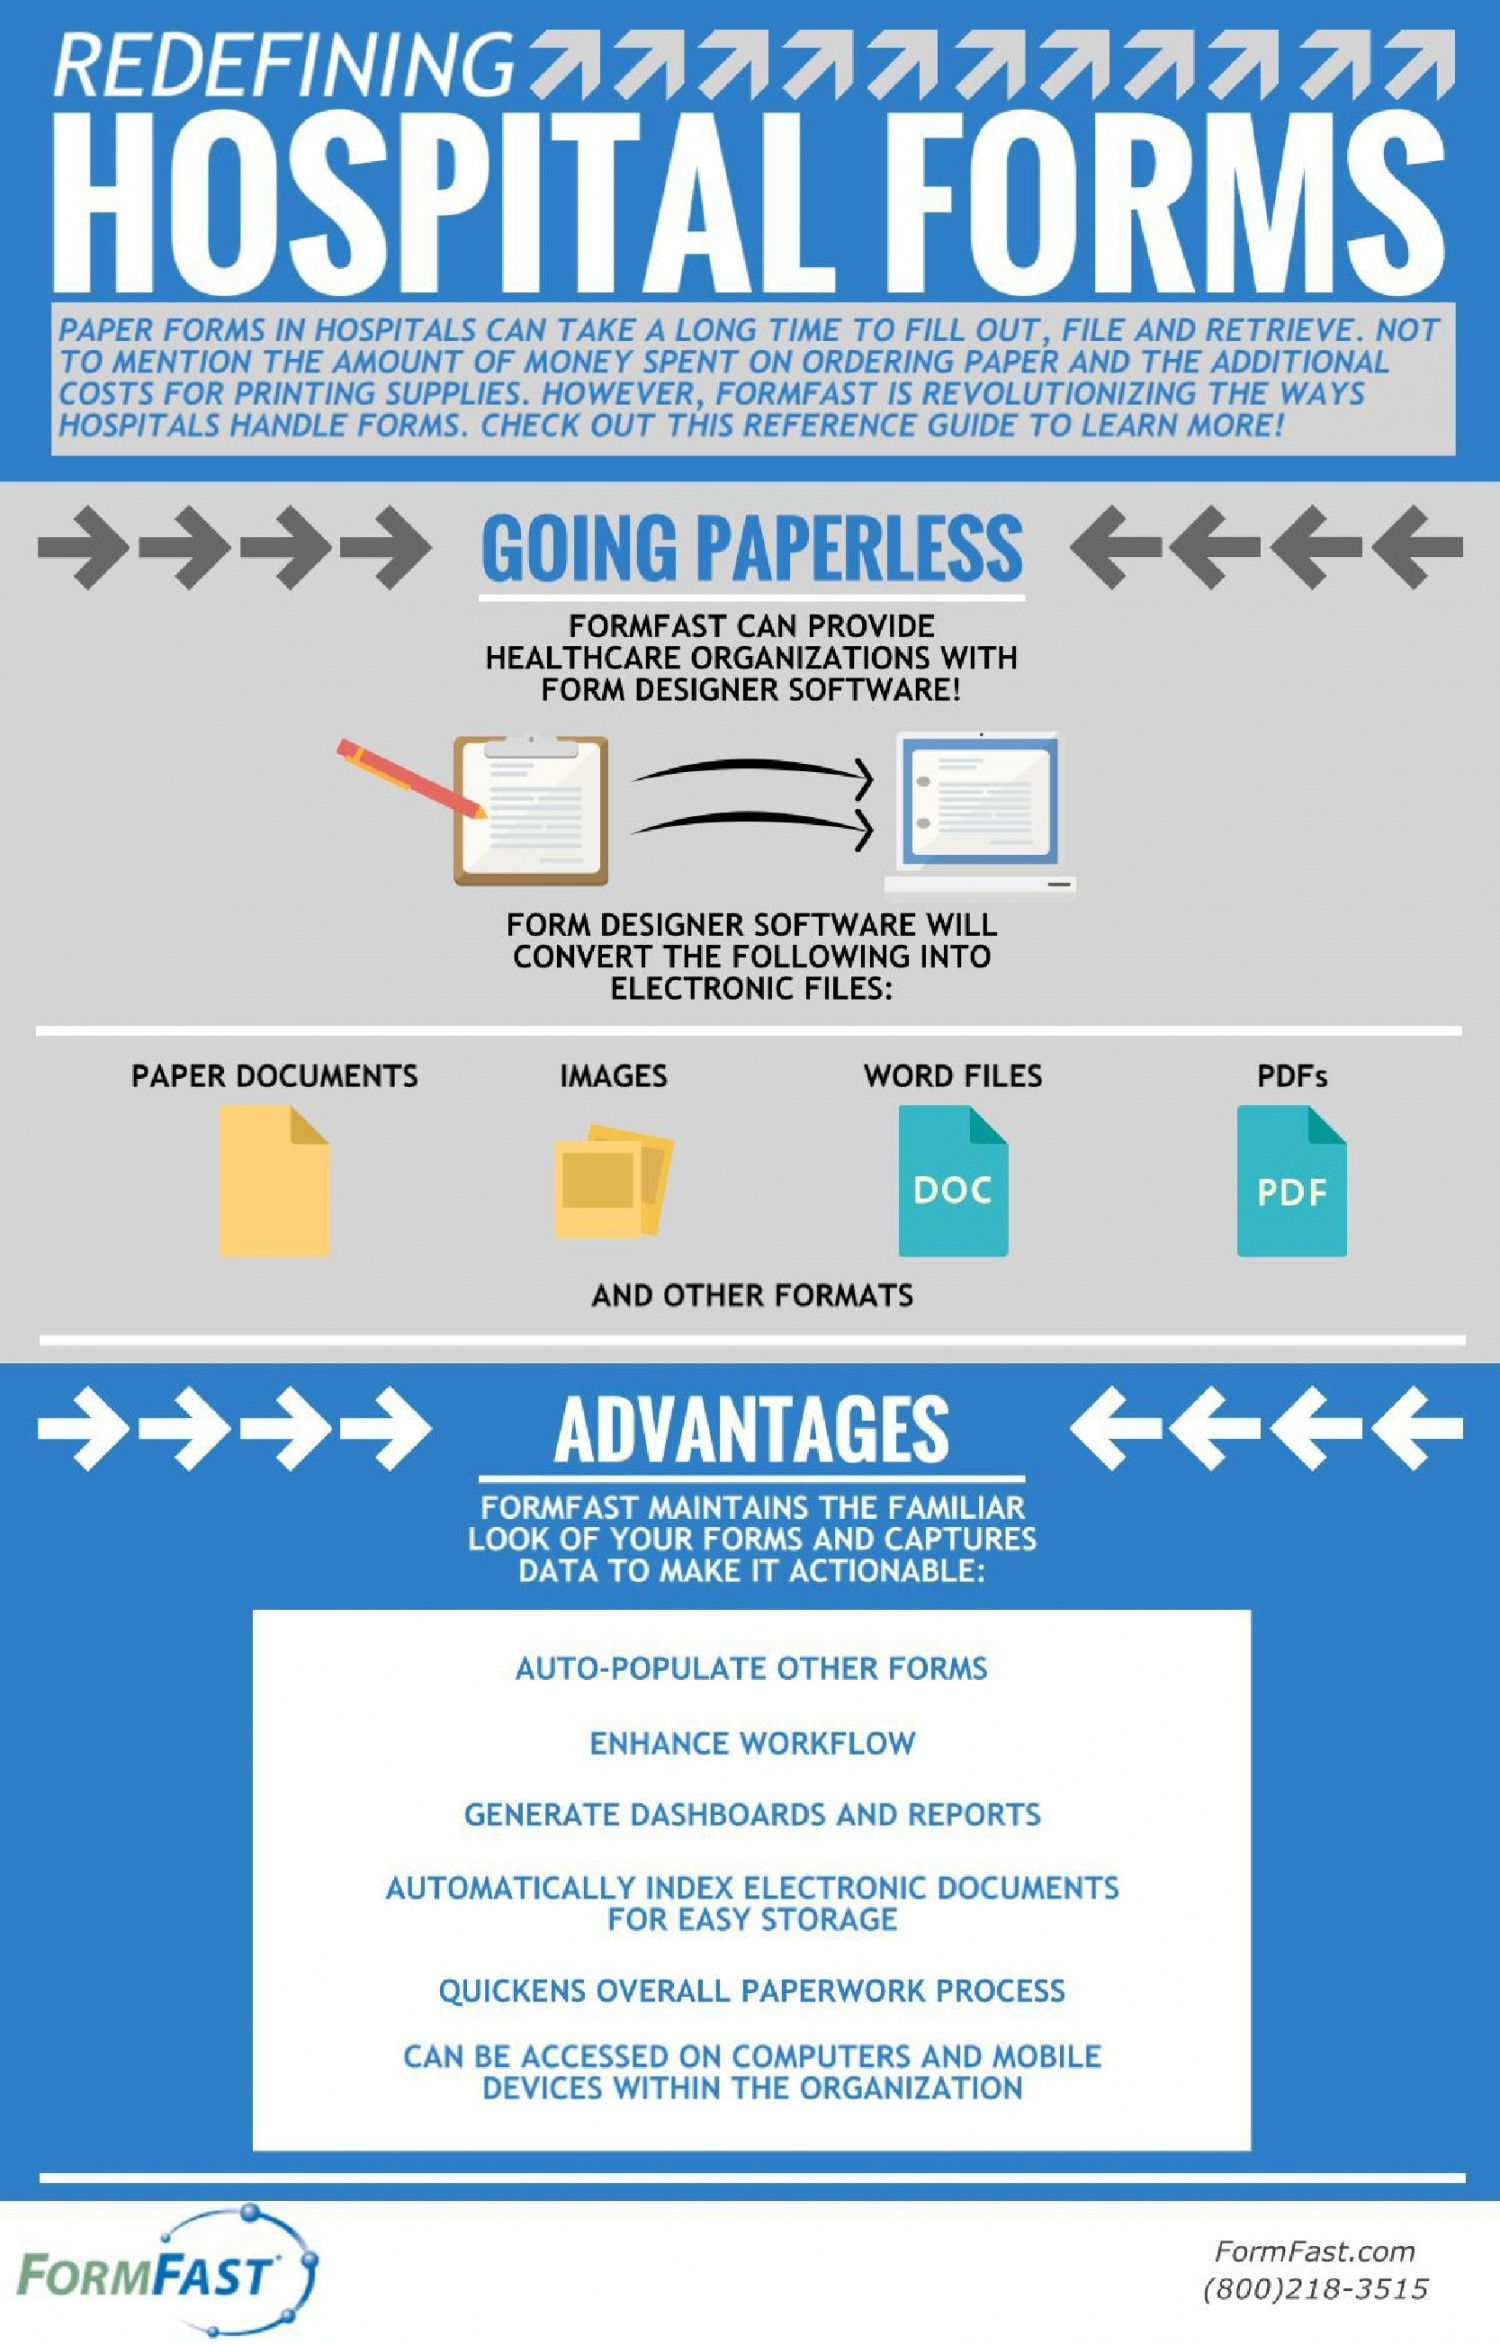 Redefining Hospital Forms Infographic